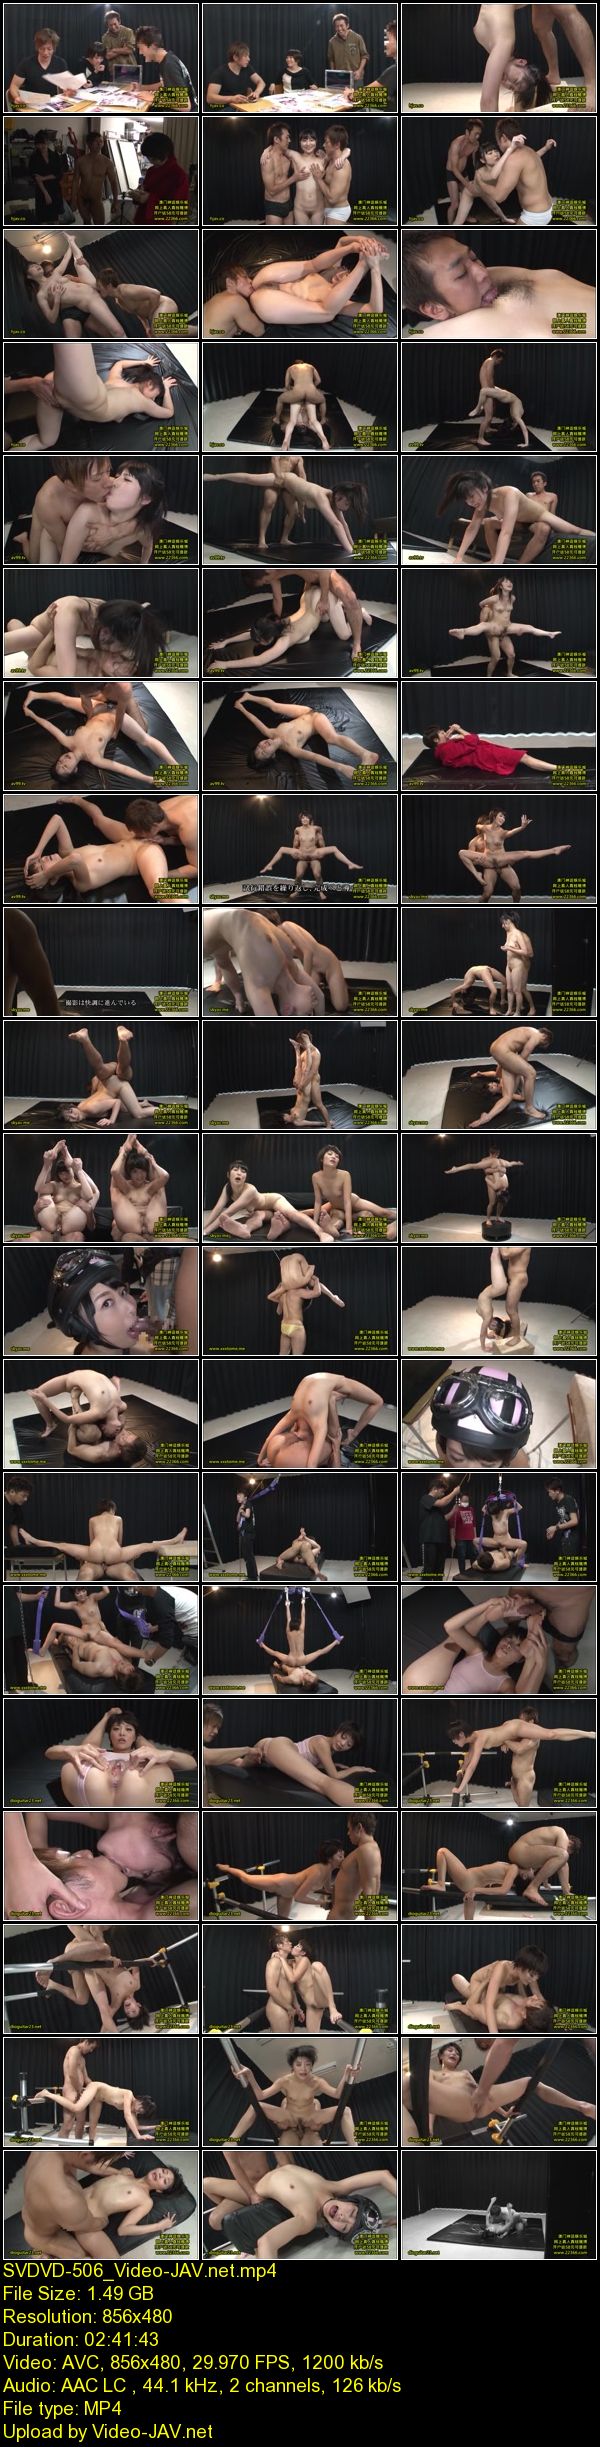 Download Japanese Adult Video [SVDVD 506] 超絶体位セックス Planning 2015 12 10